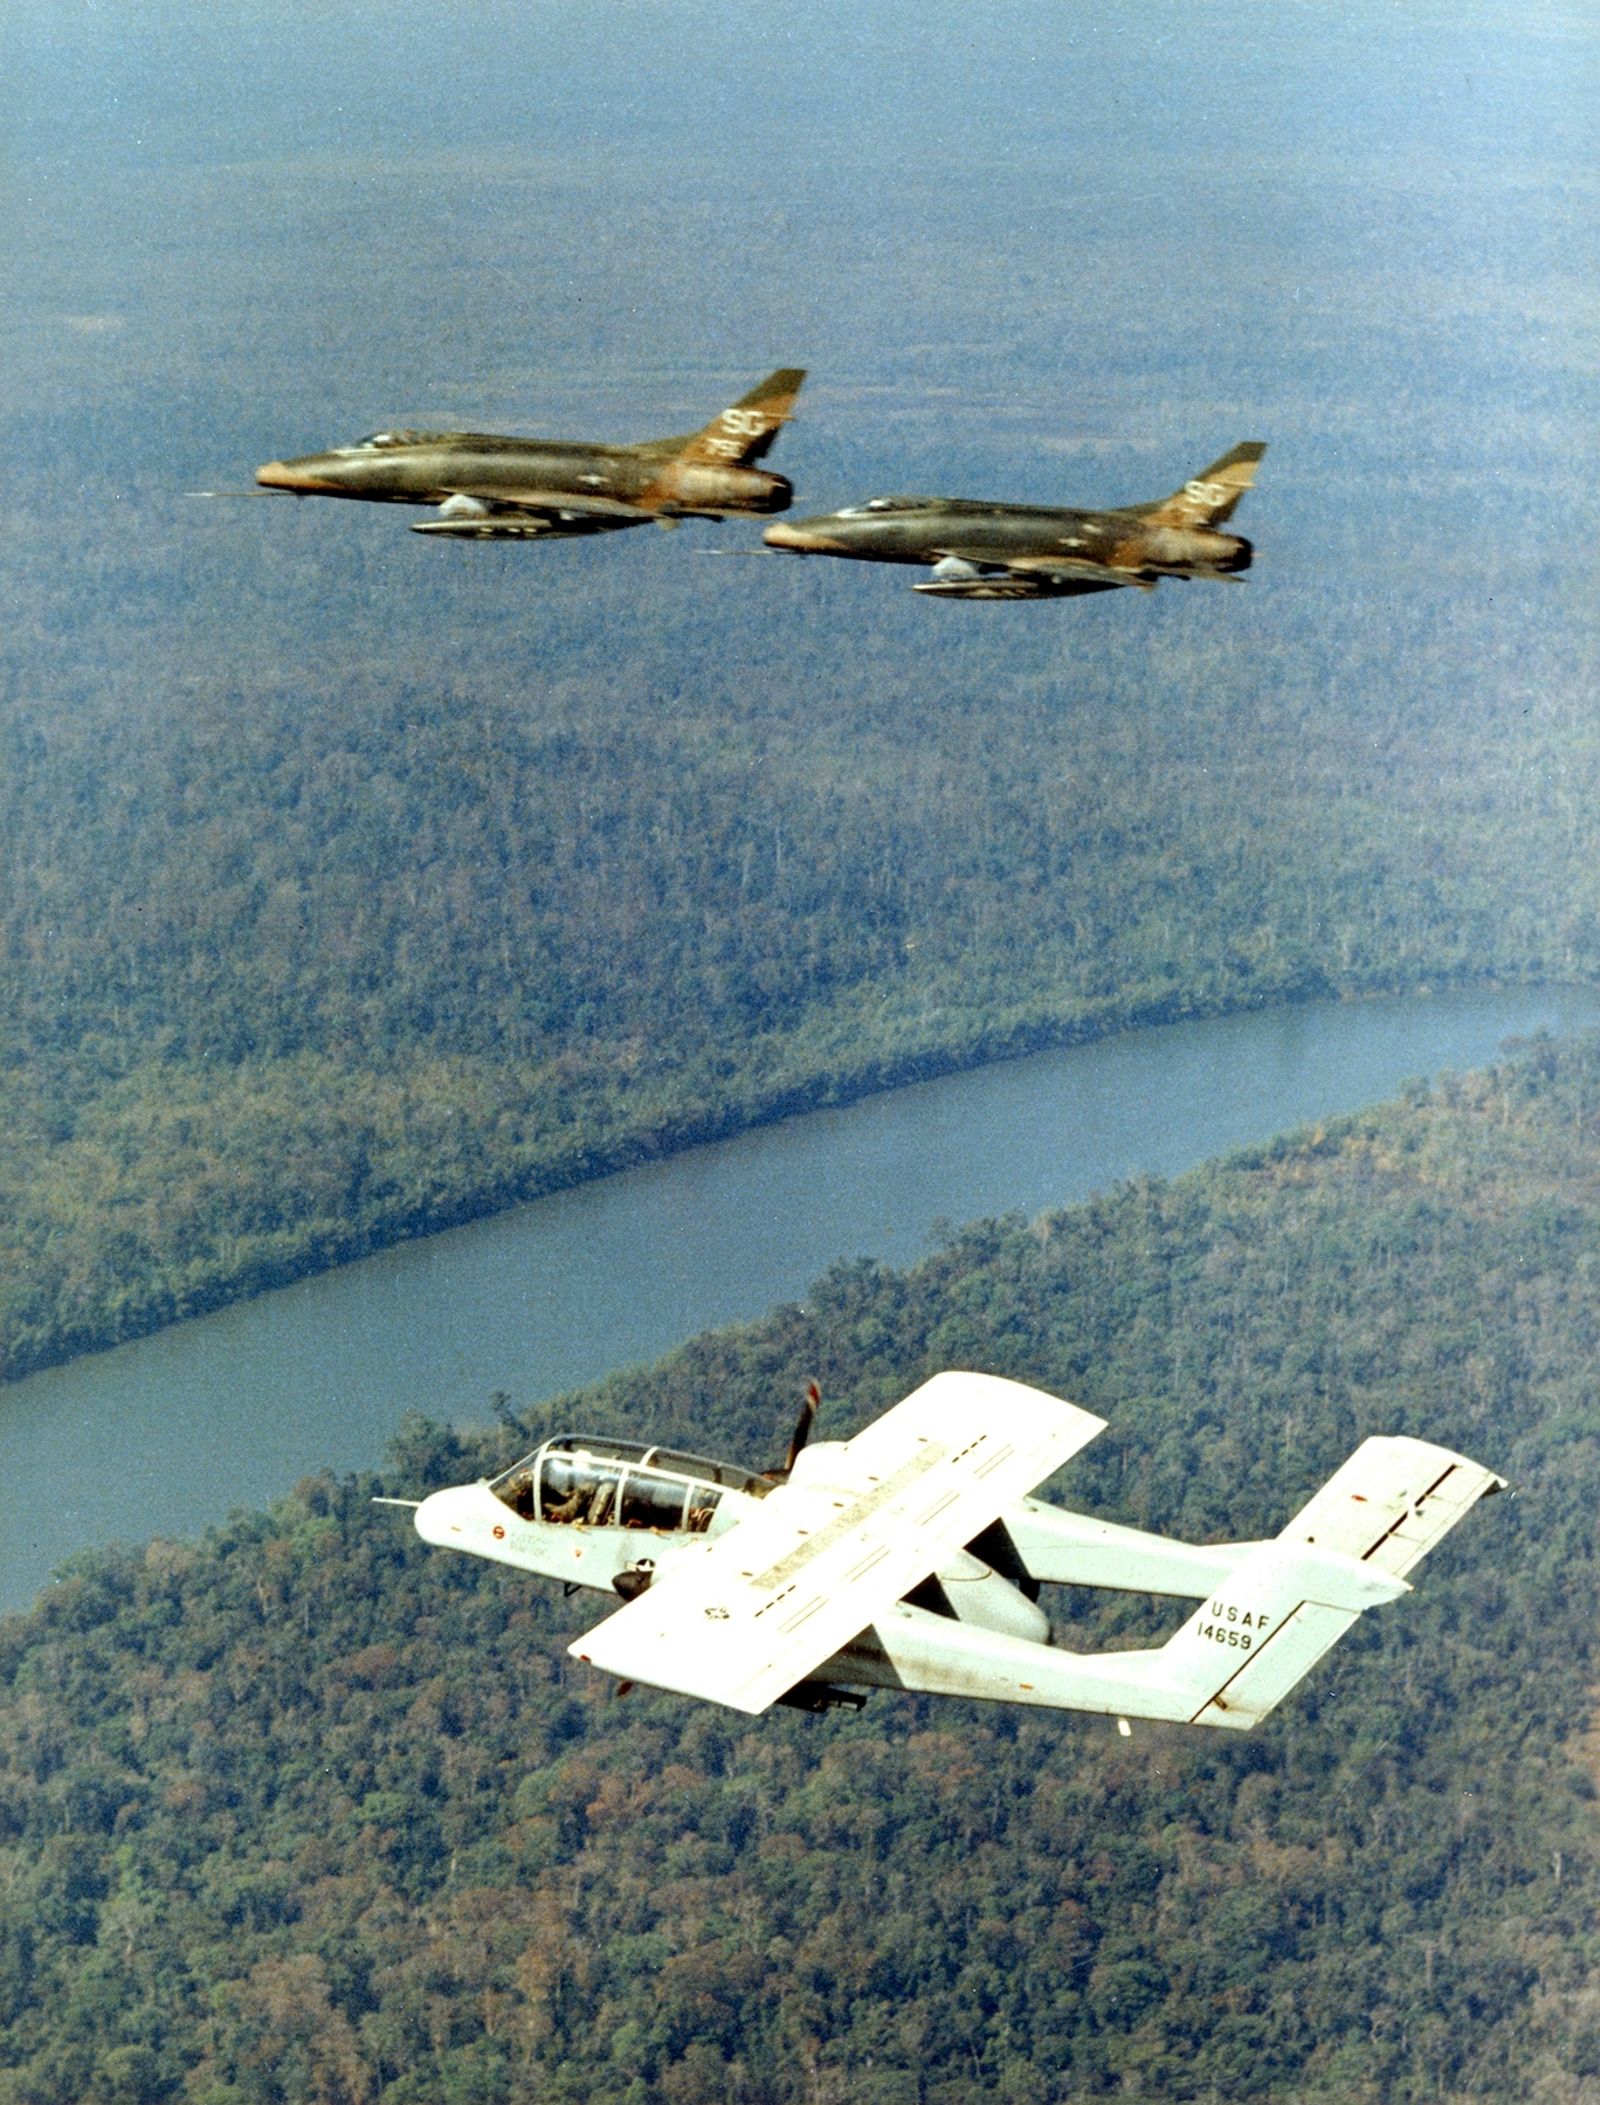 OV-10A acting as FAC for two F-100C Super Sabre fighter/bombers over Vietnam, circa 1969